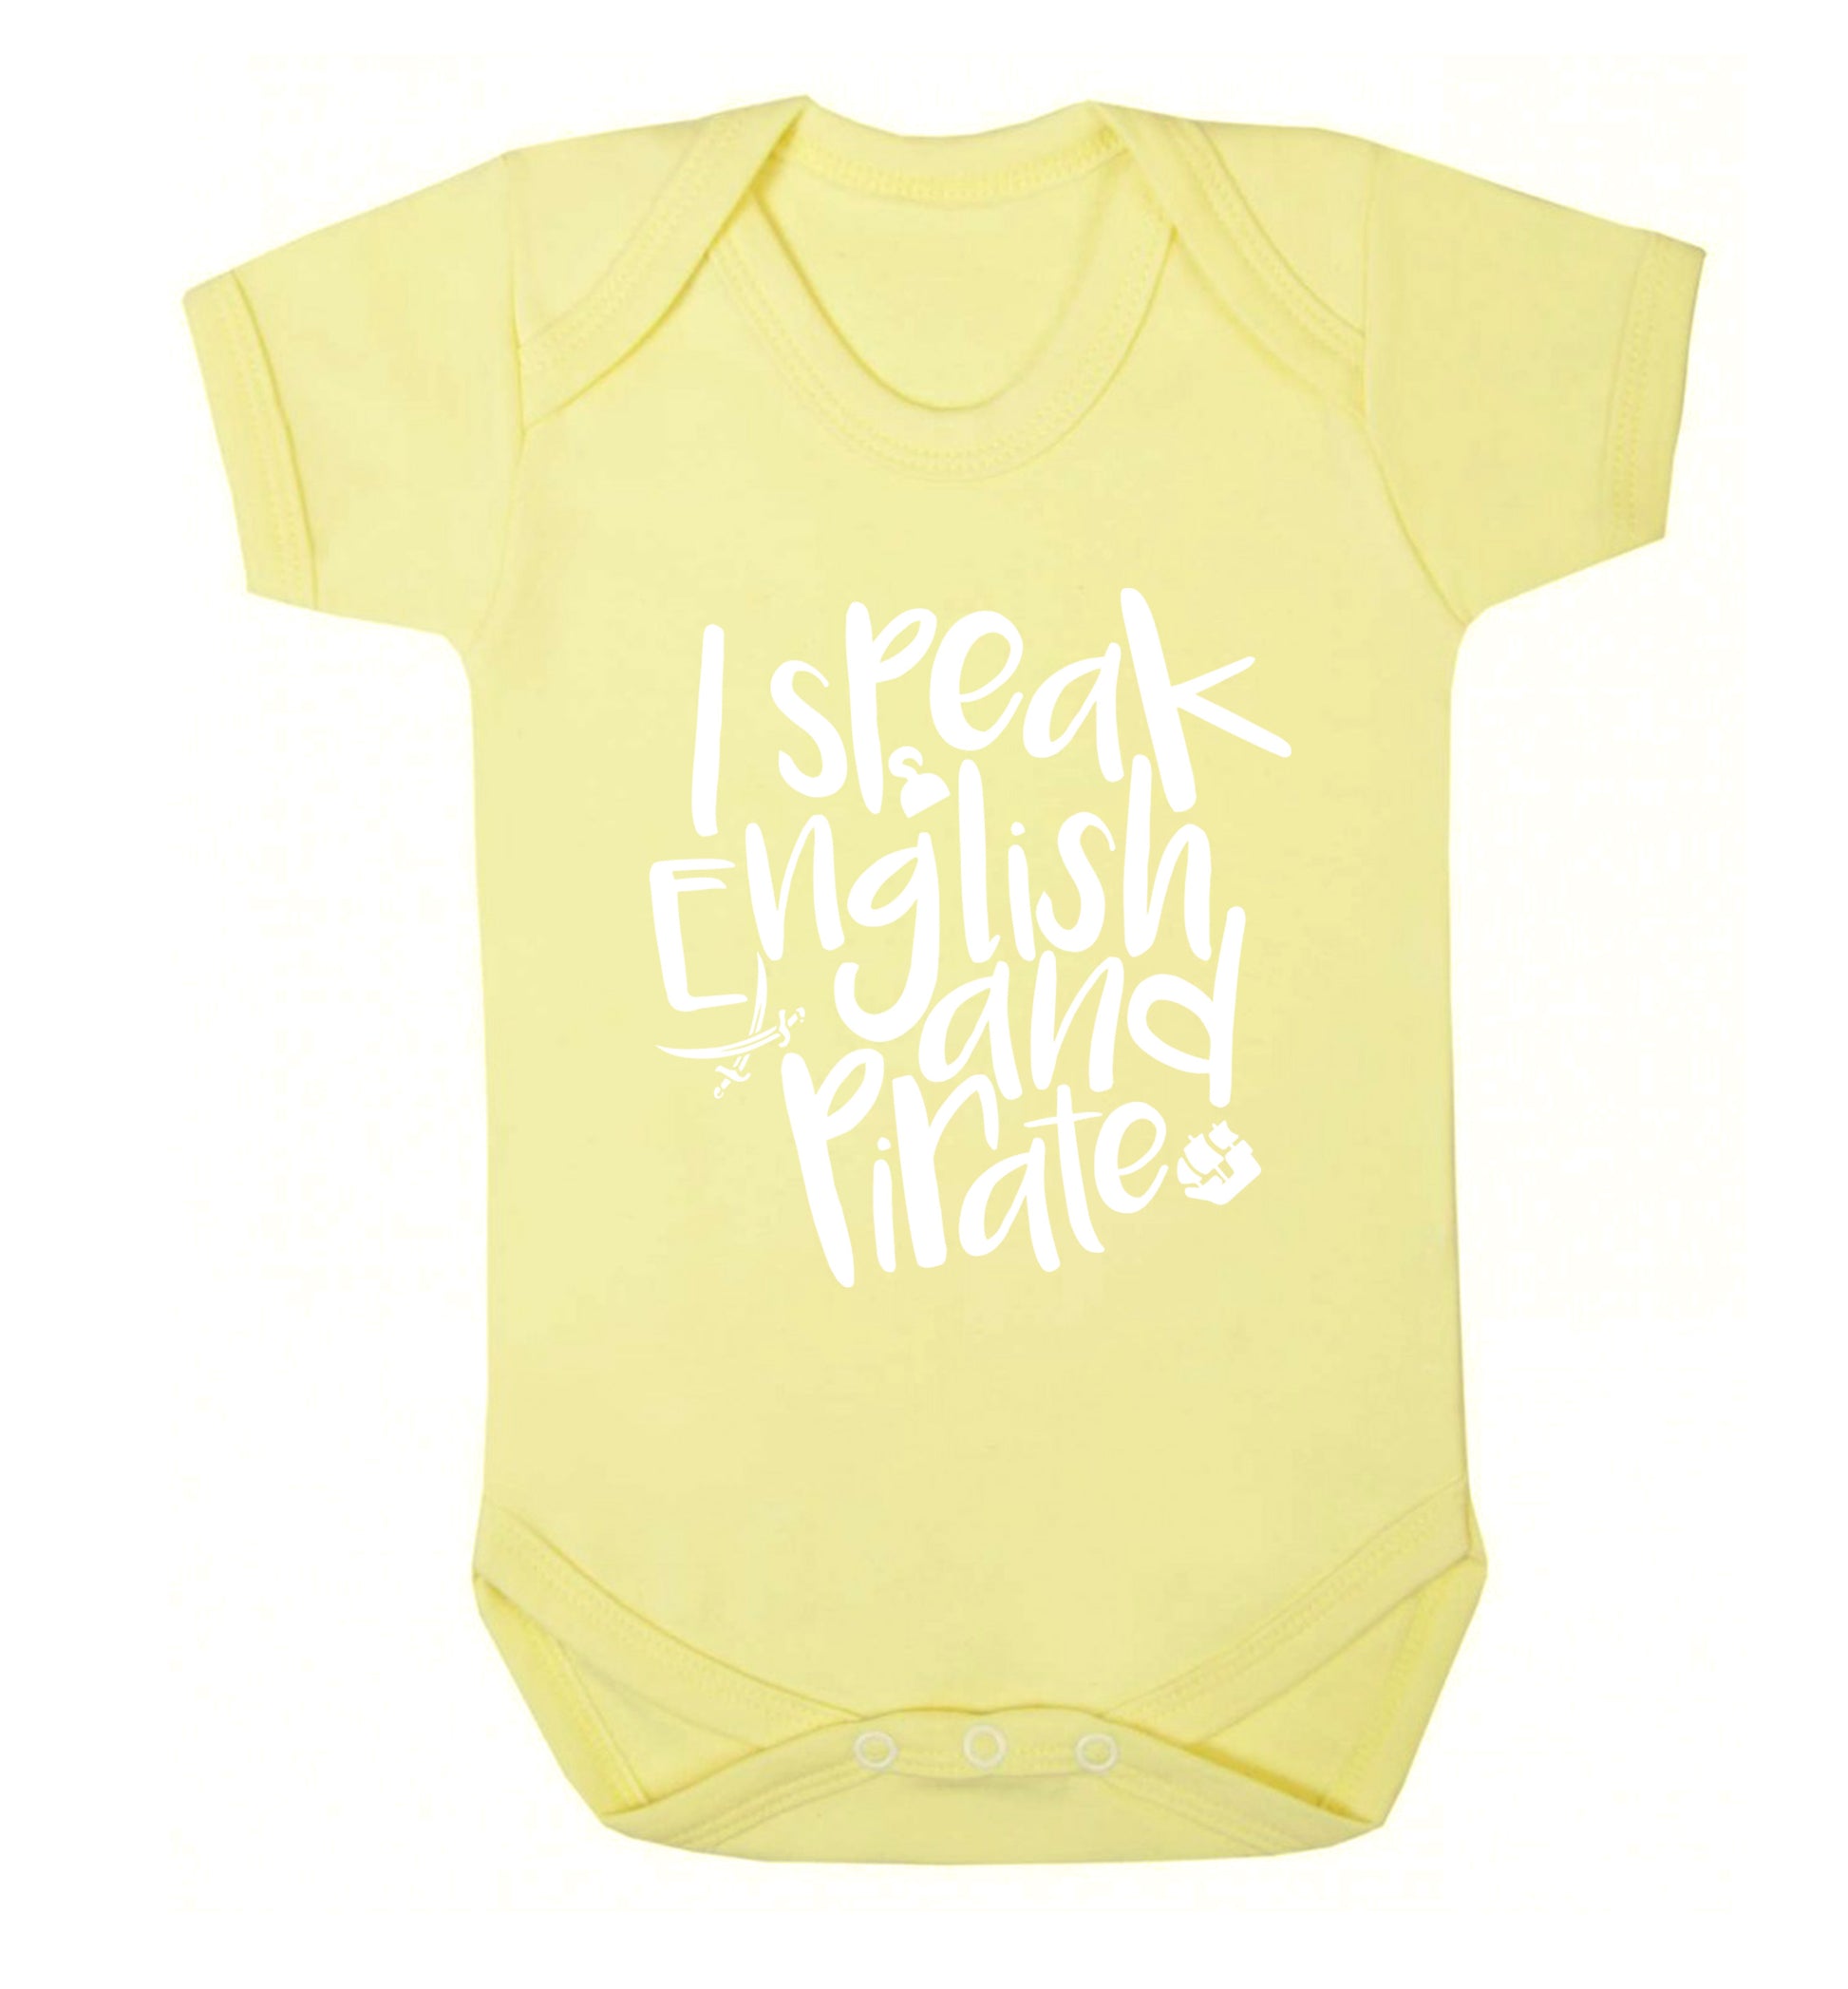 I speak English and pirate Baby Vest pale yellow 18-24 months